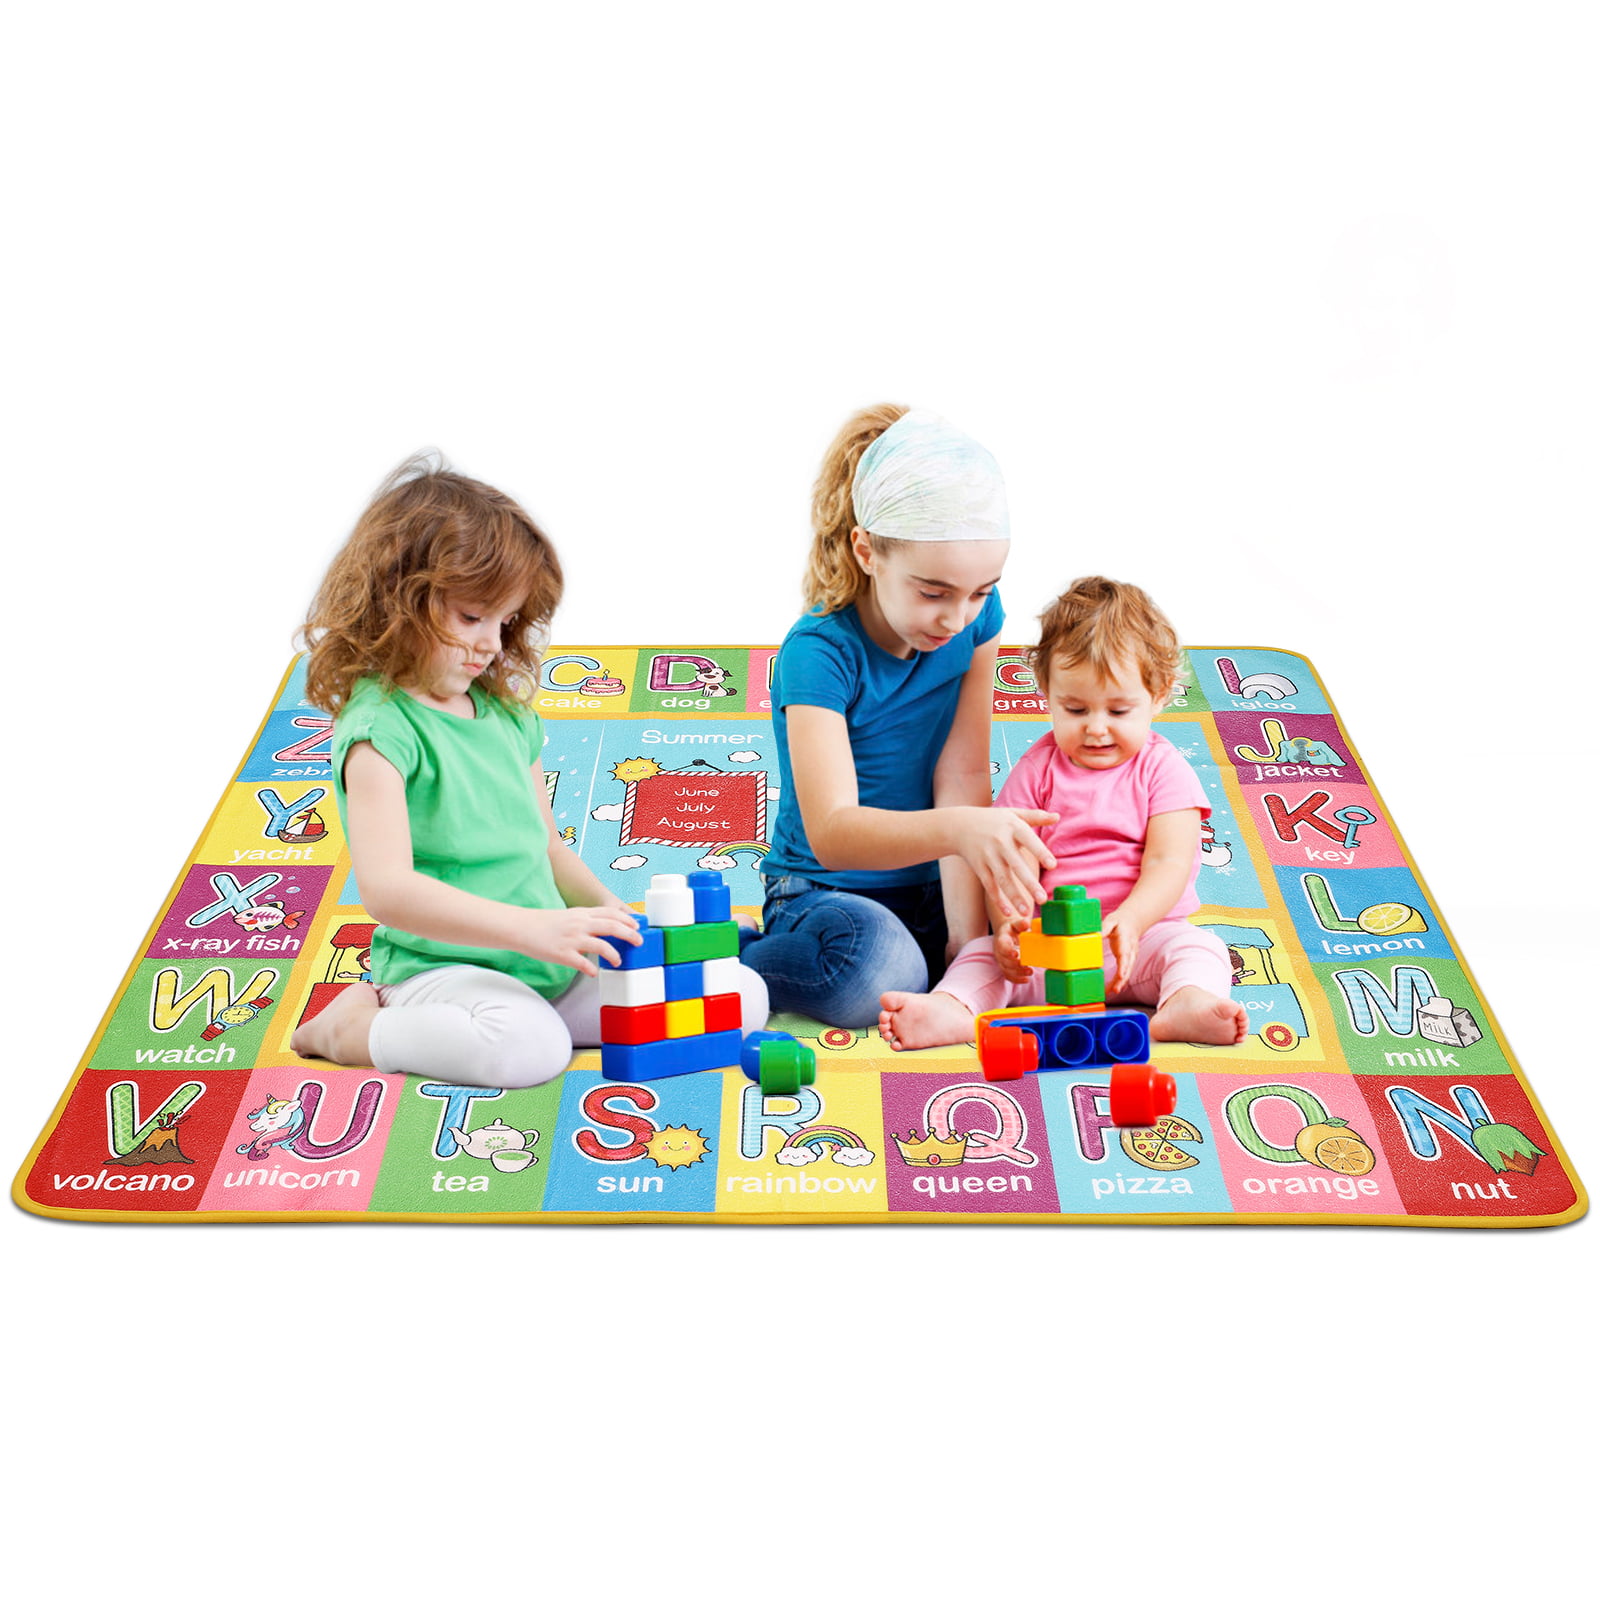 Washable Crawling Mat 59 Non-Slip Cotton Gym Play Mat Toy Storage Sea World Winthome Baby Play Mat Round